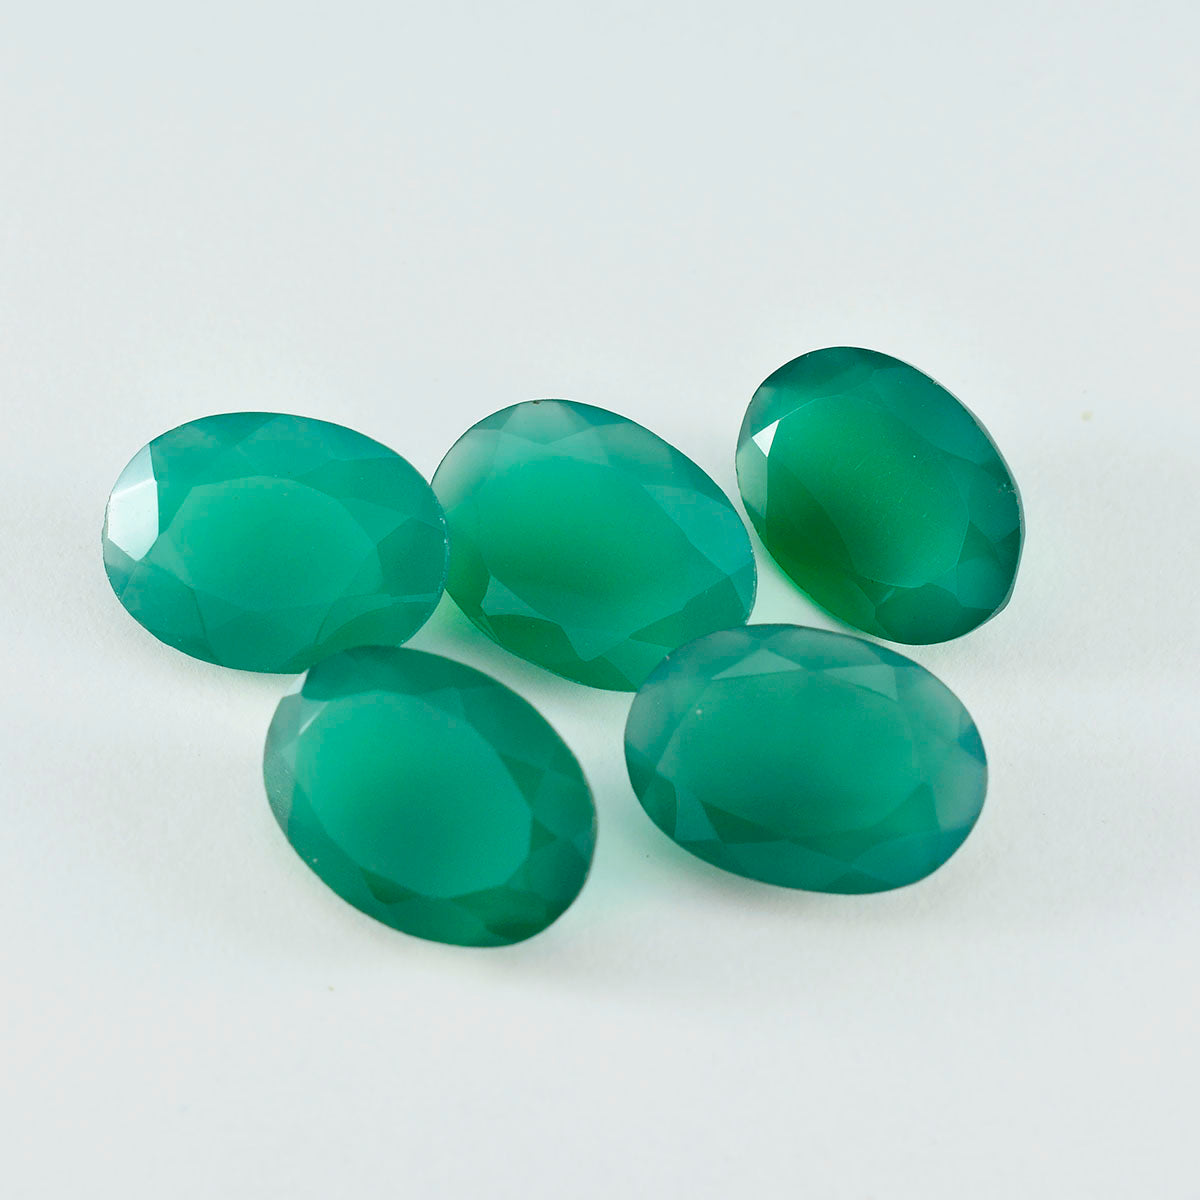 Riyogems 1PC Real Green Onyx Faceted 12x16 mm Oval Shape sweet Quality Loose Gems